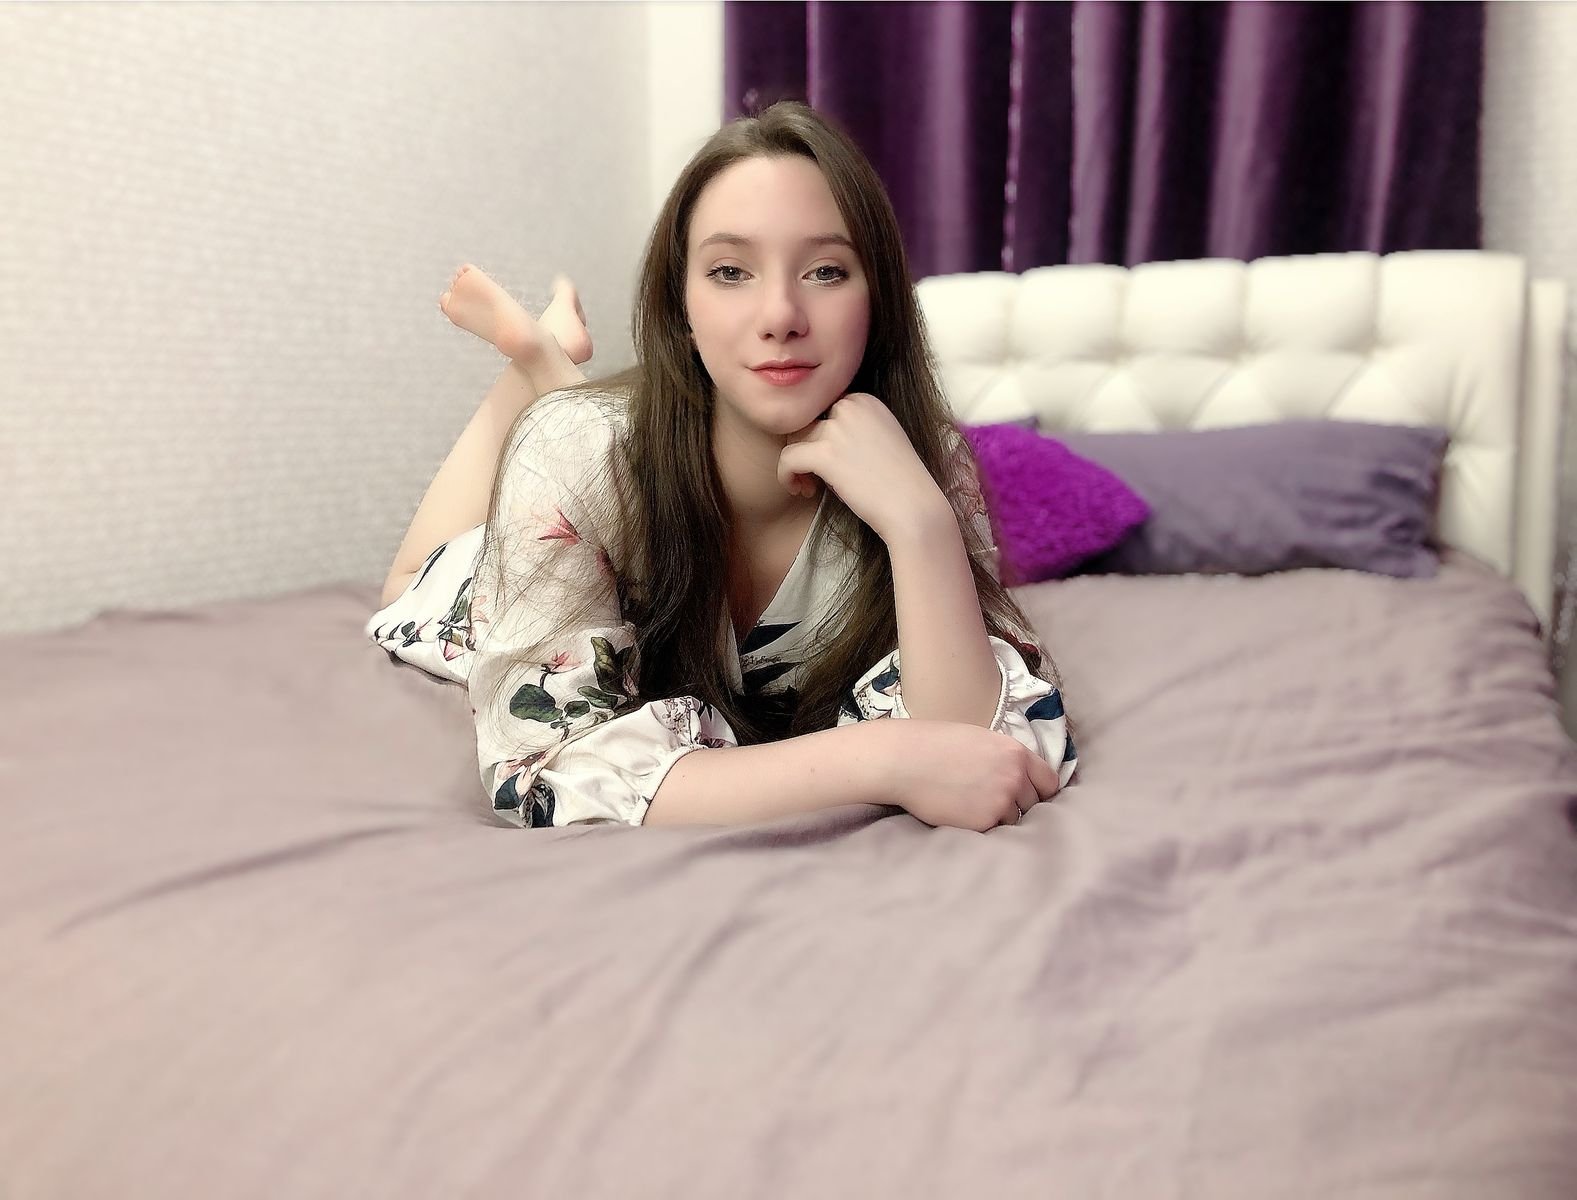 SkyPrivate live sex chat with Agnes